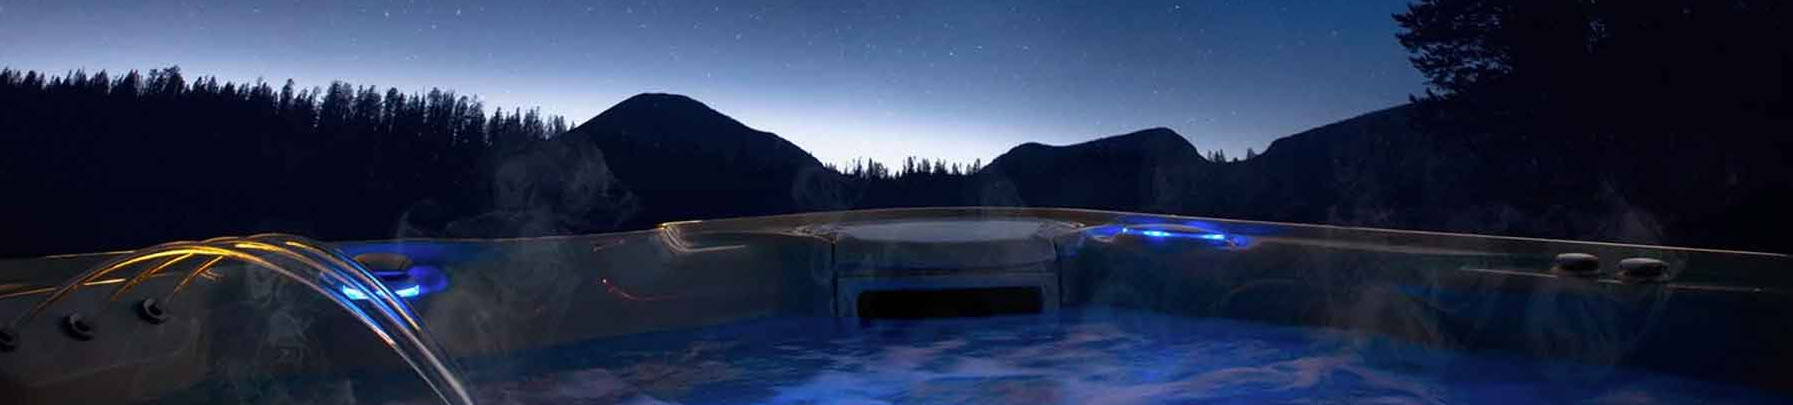 End Restless Sleep with a Soothing Dip in the Family Hot Tub, Hot Tubs Verona WI